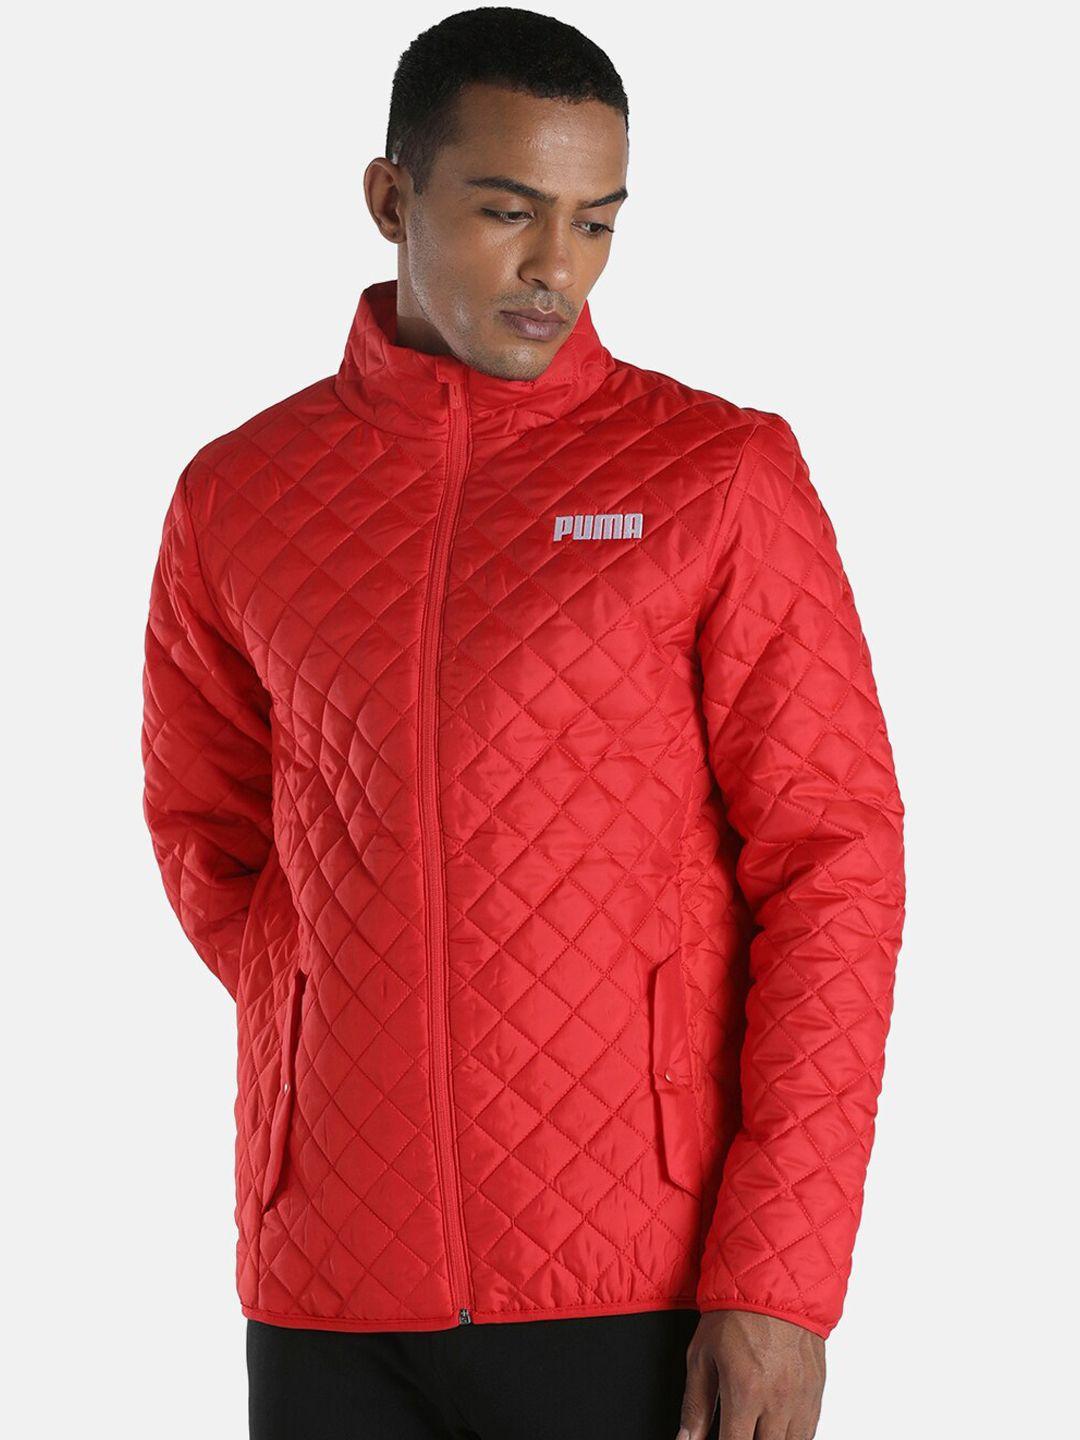 puma men red quilted jacket